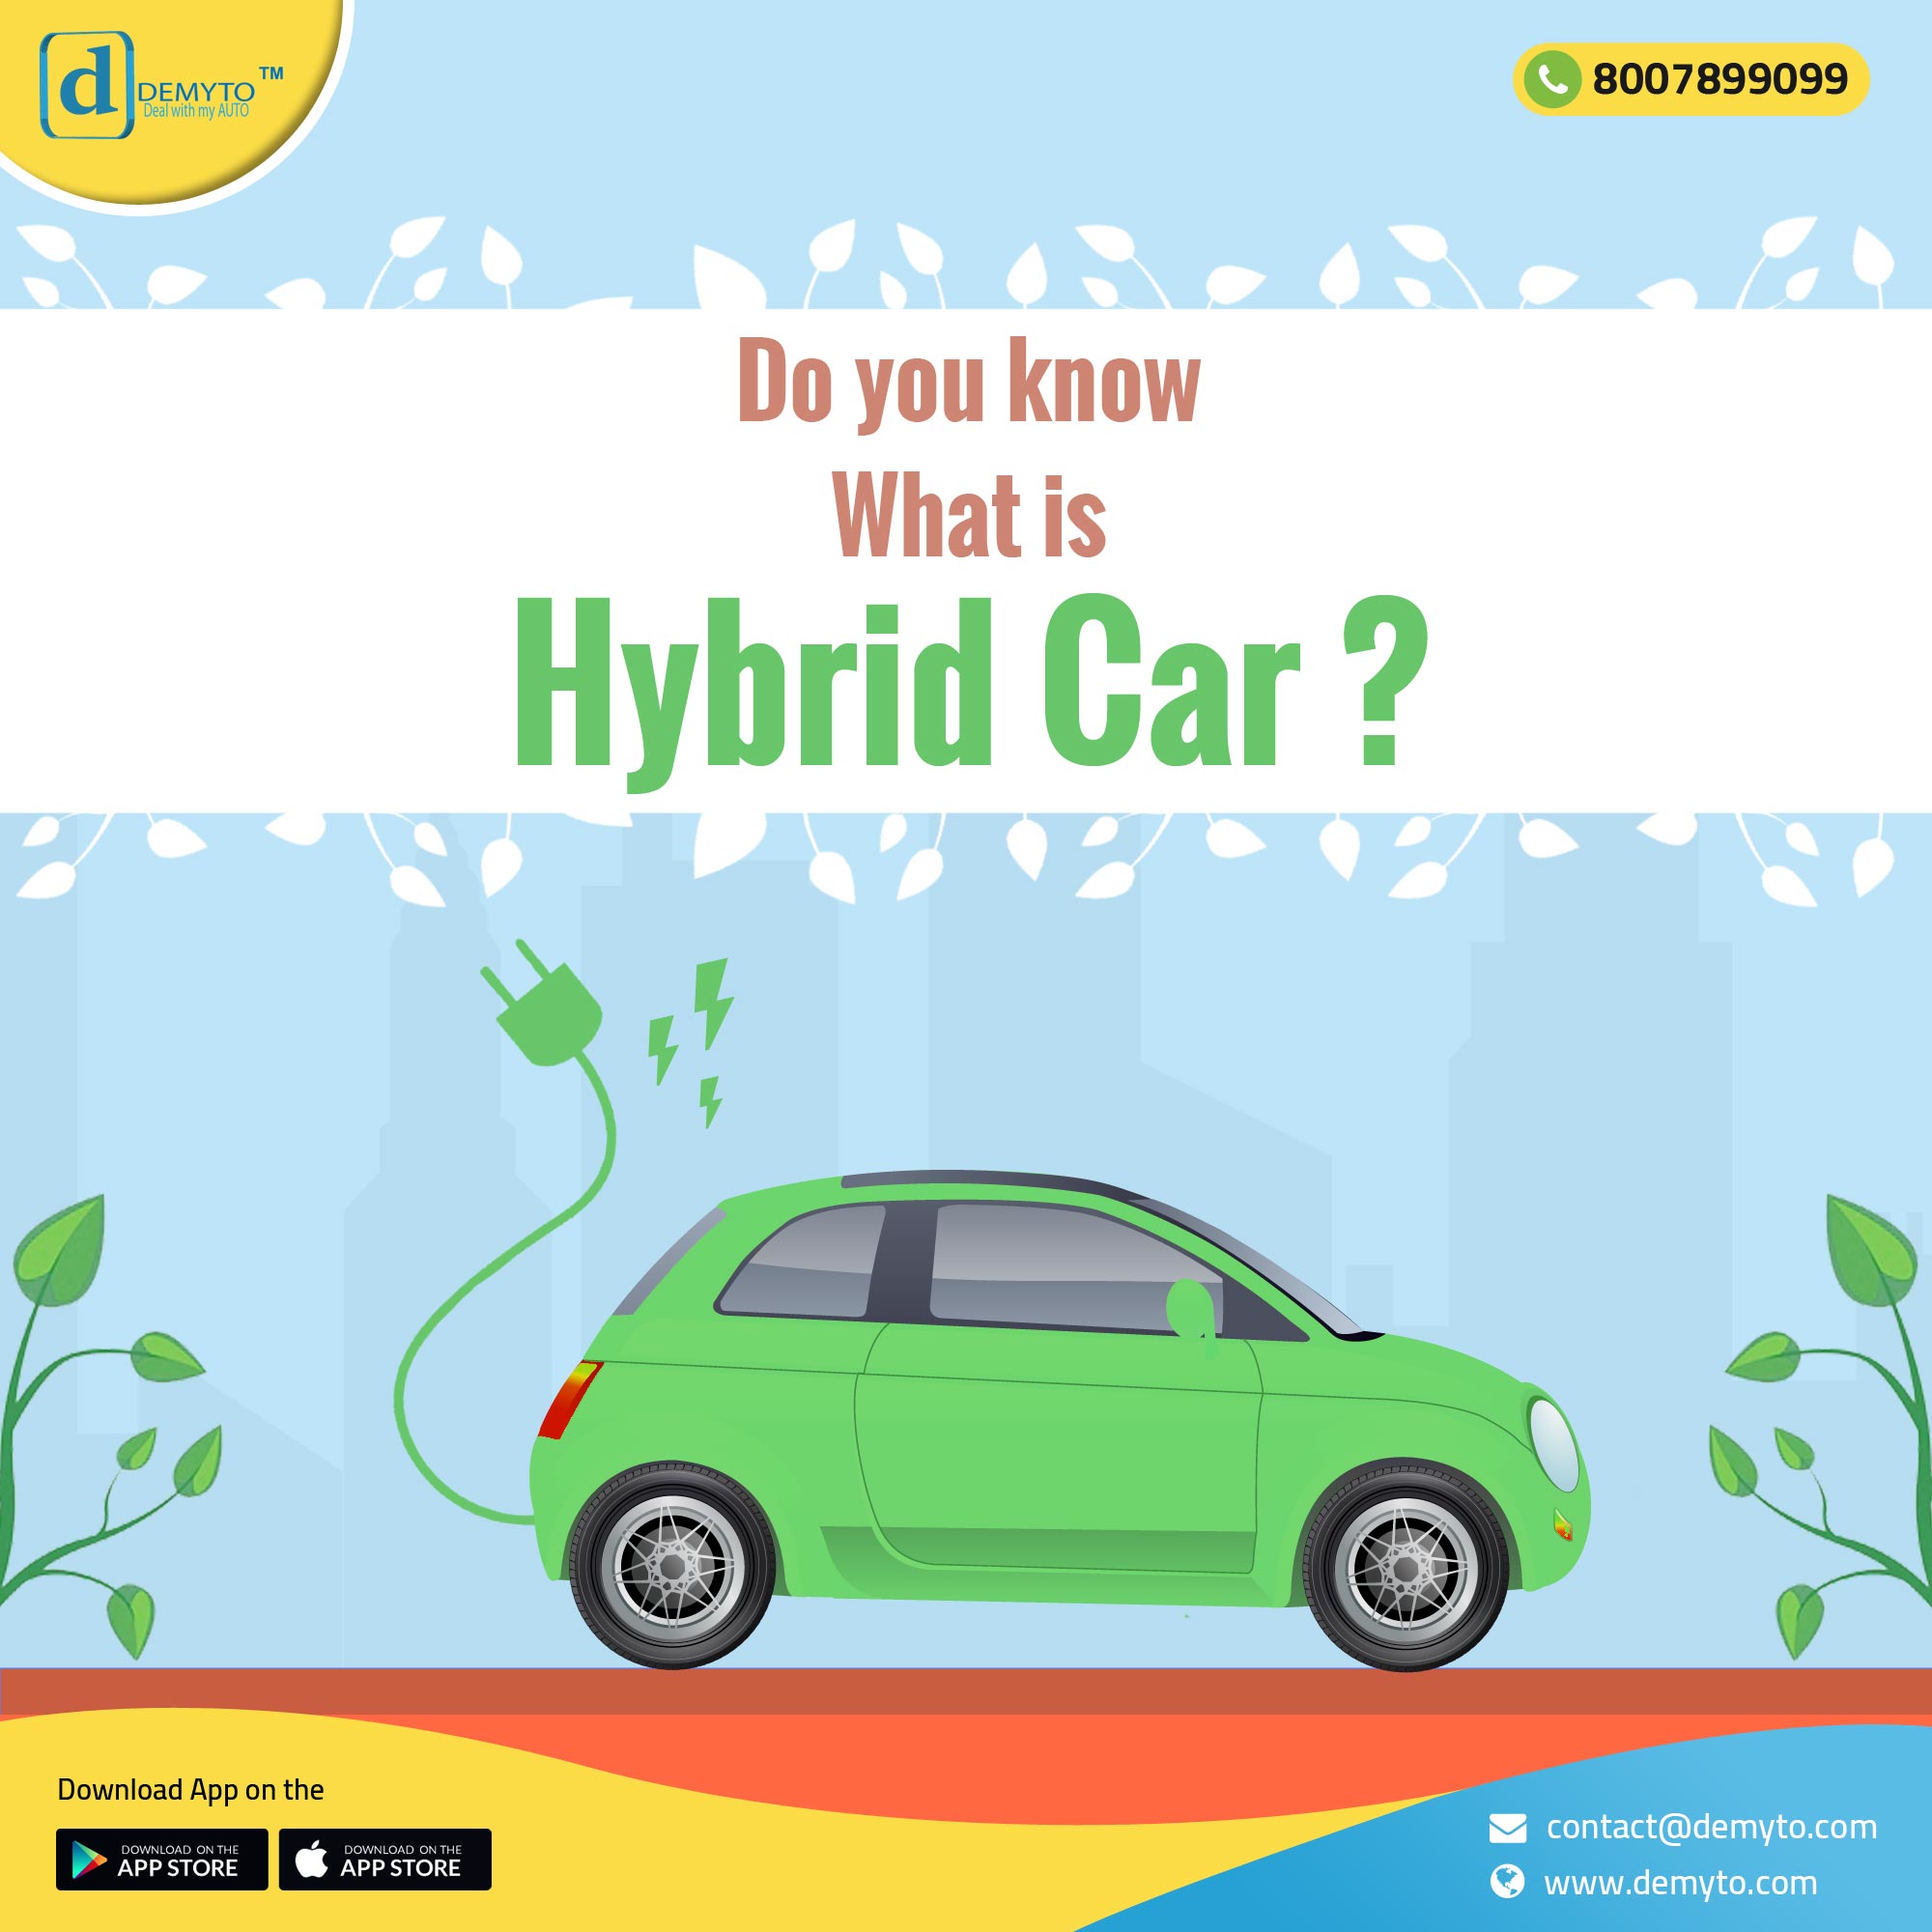 Do you know what hybrid car is?